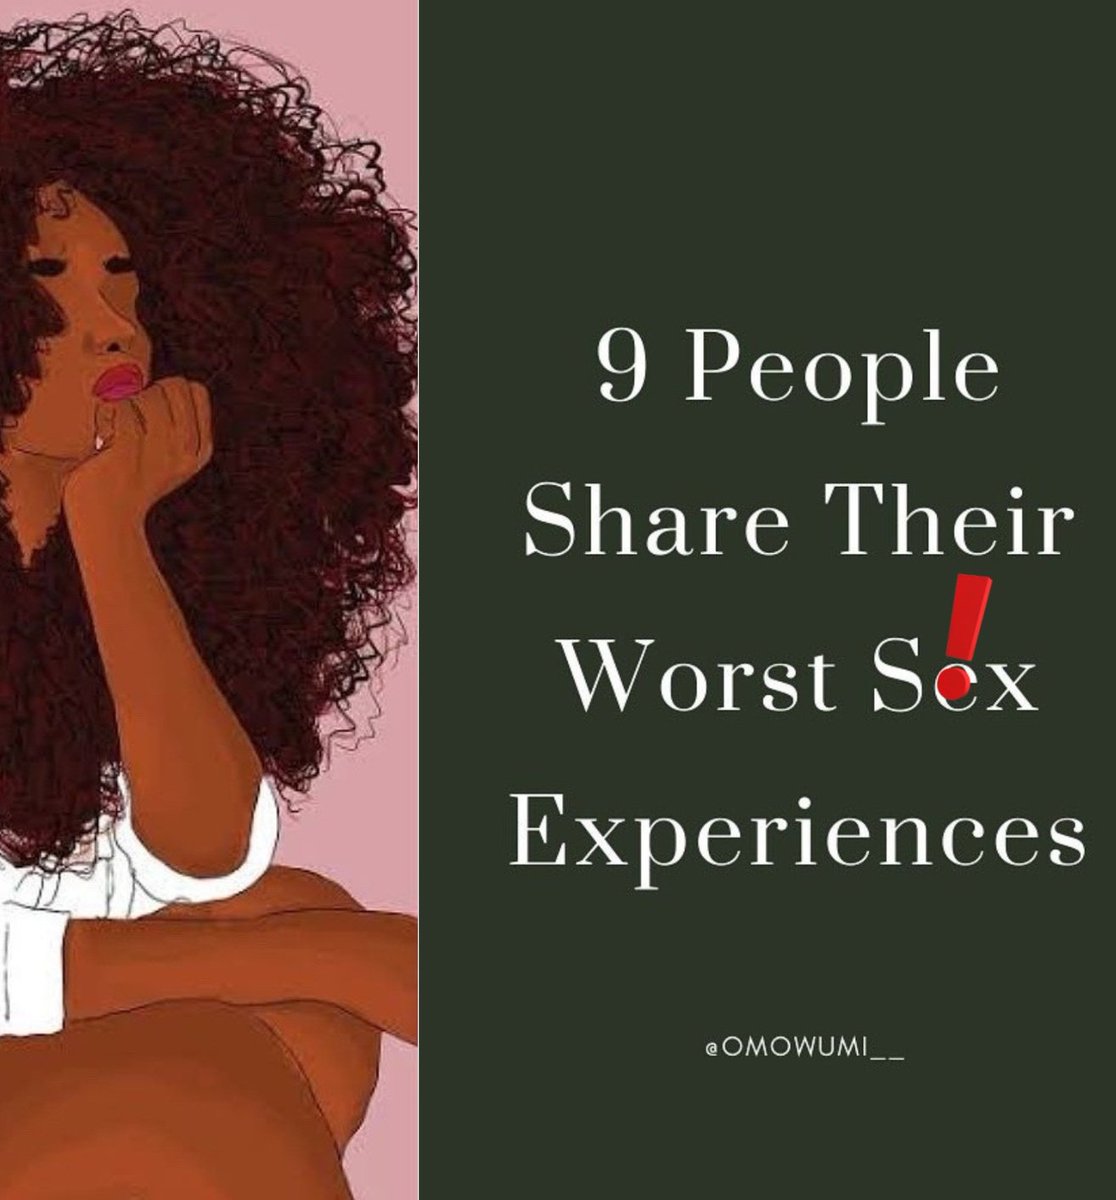 9 people share their embarrassing & w0rst s€xx experiences😭🍿 Thread 🧵